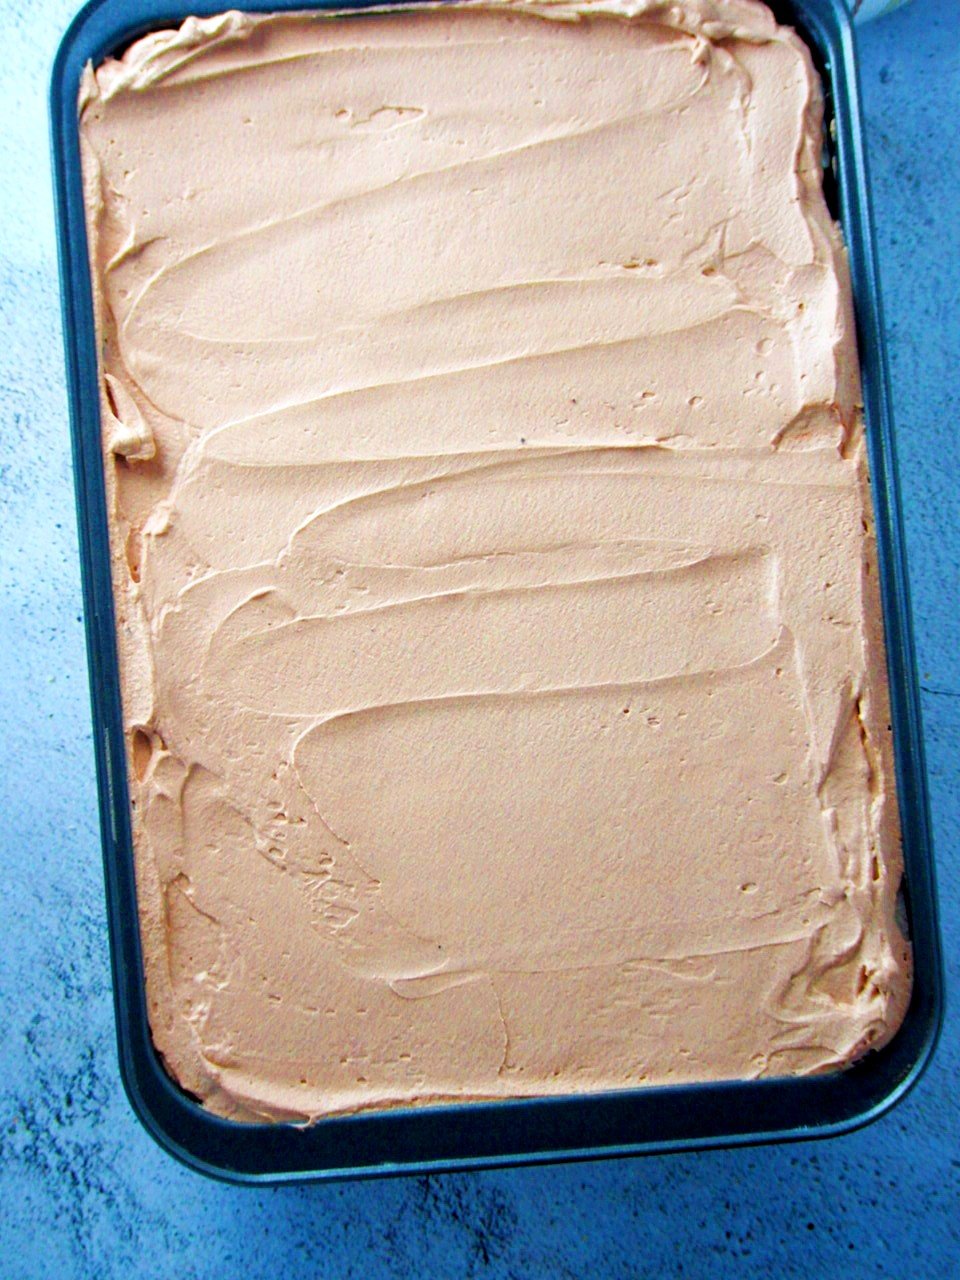 Top angle shot of fully frosted Ovaltine cake on a 9x13 baking pan.